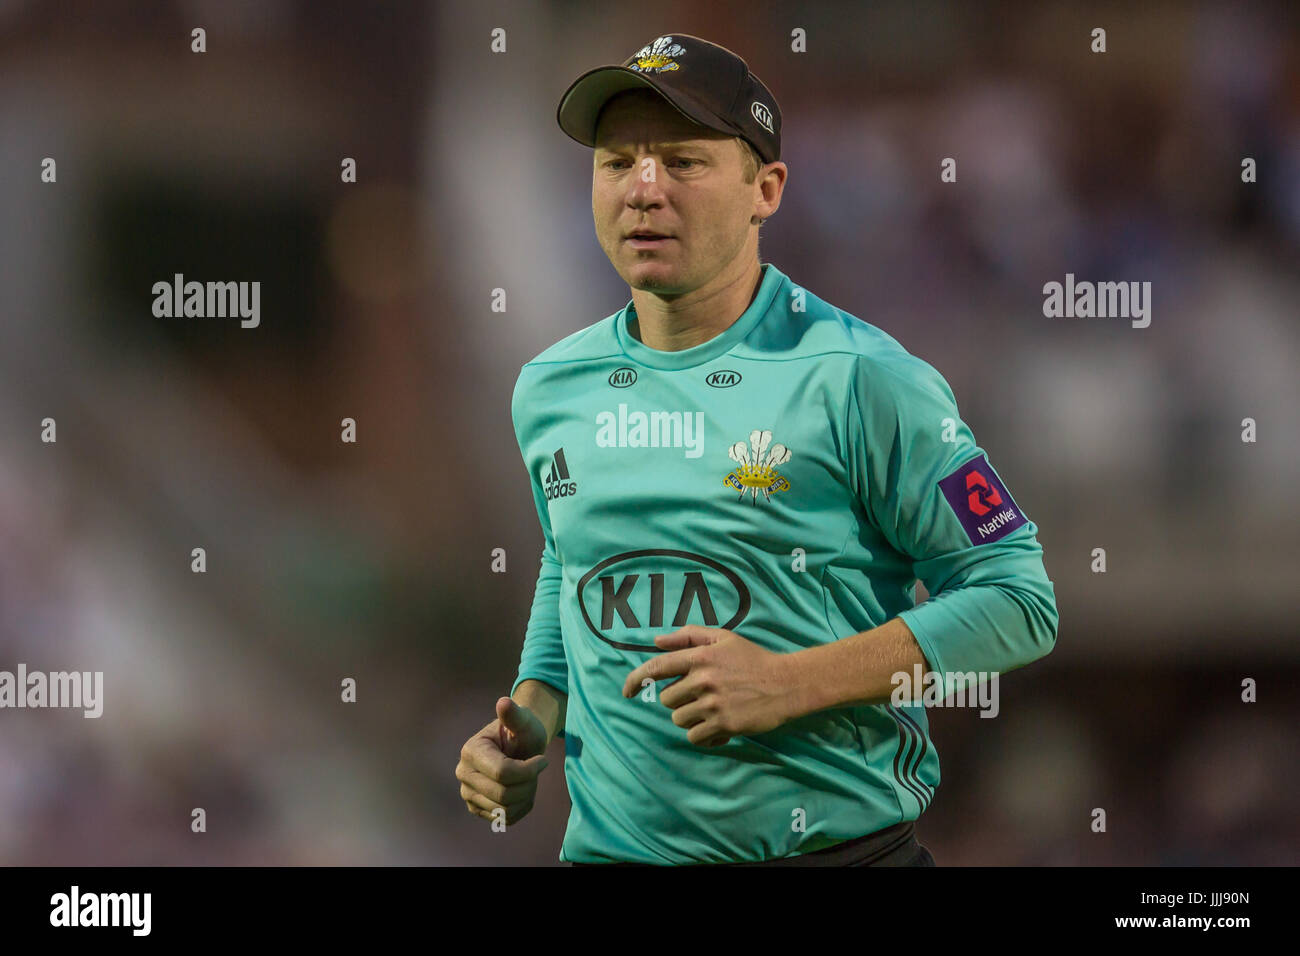 London, UK. 19 July, 2017. Surrey captain Gareth Batty in the field for Surrey against Essex in the NatWest T20 Blast match at the Kia Oval. David Rowe/Alamy Live News Stock Photo